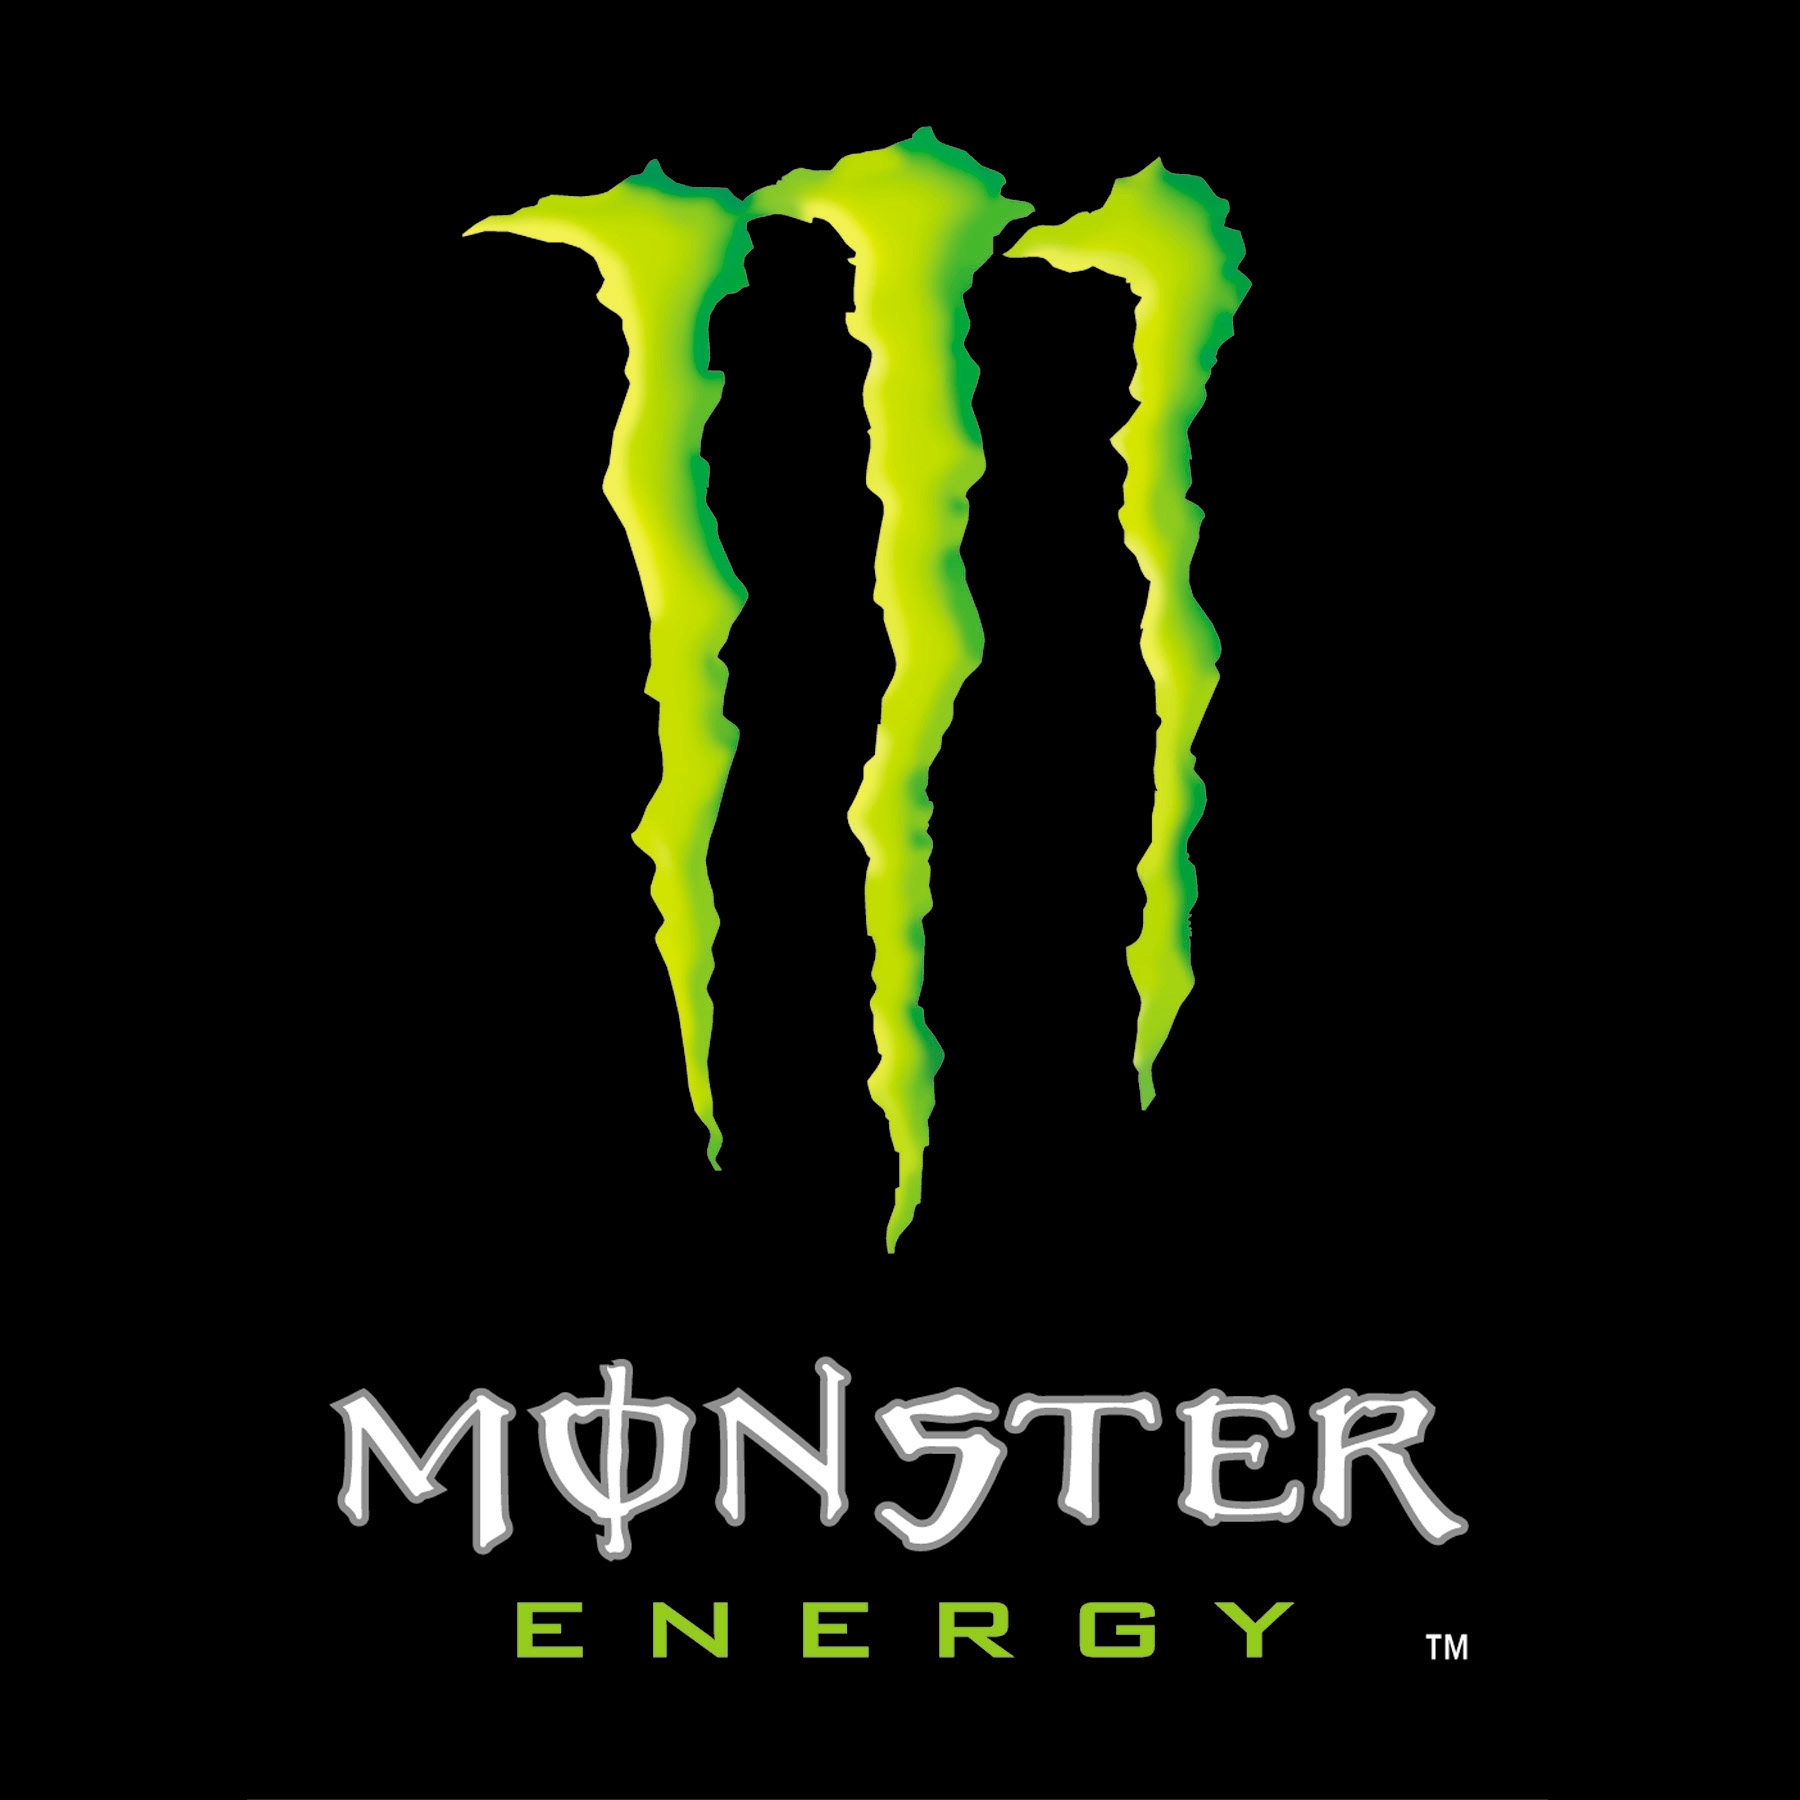 What energy drink do you like the best?